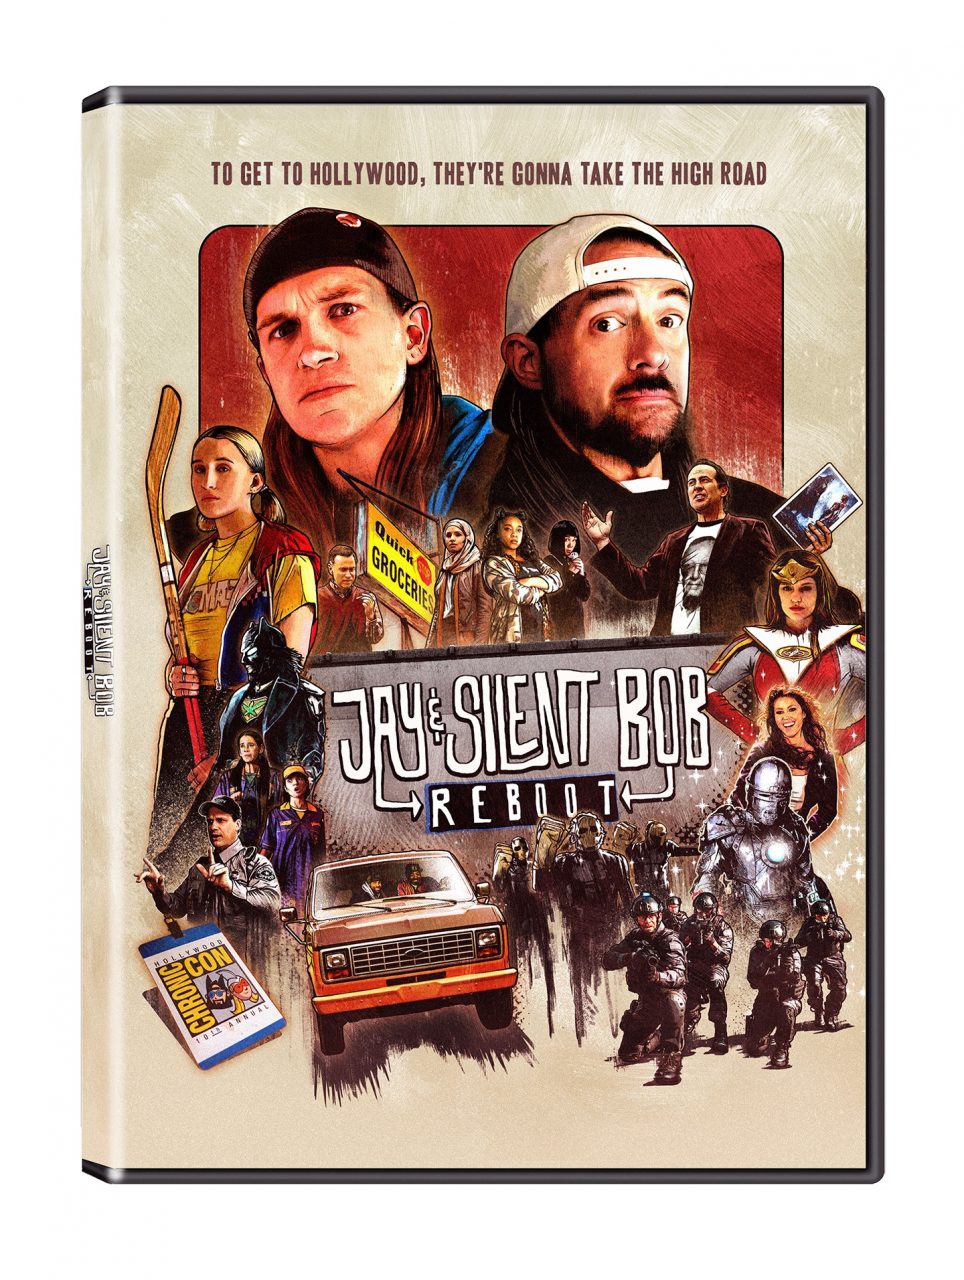 Jay & Silent Bob Reboot DVD cover (Lionsgate Home Entertainment)